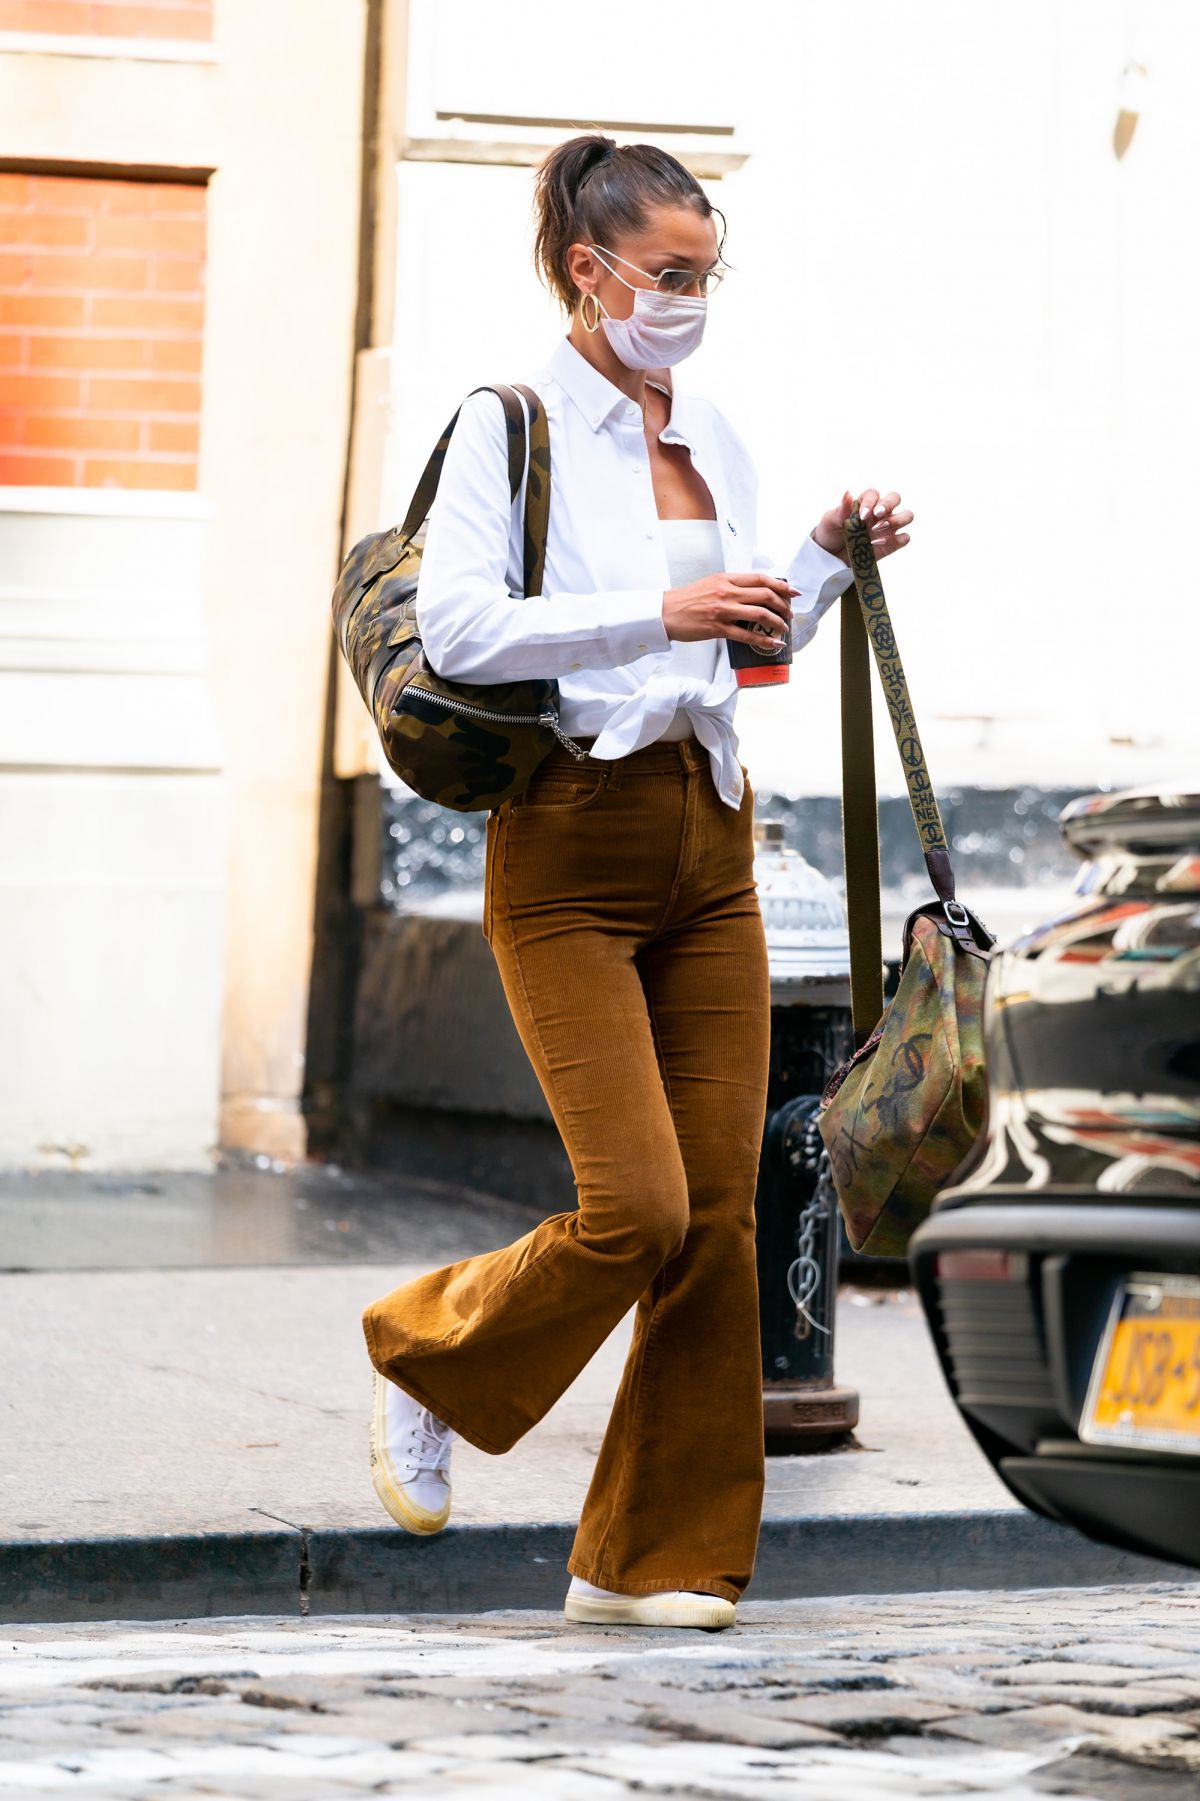 Bella Hadid  Rocks Crop Top & Mask Out In New York City July 4, 2020